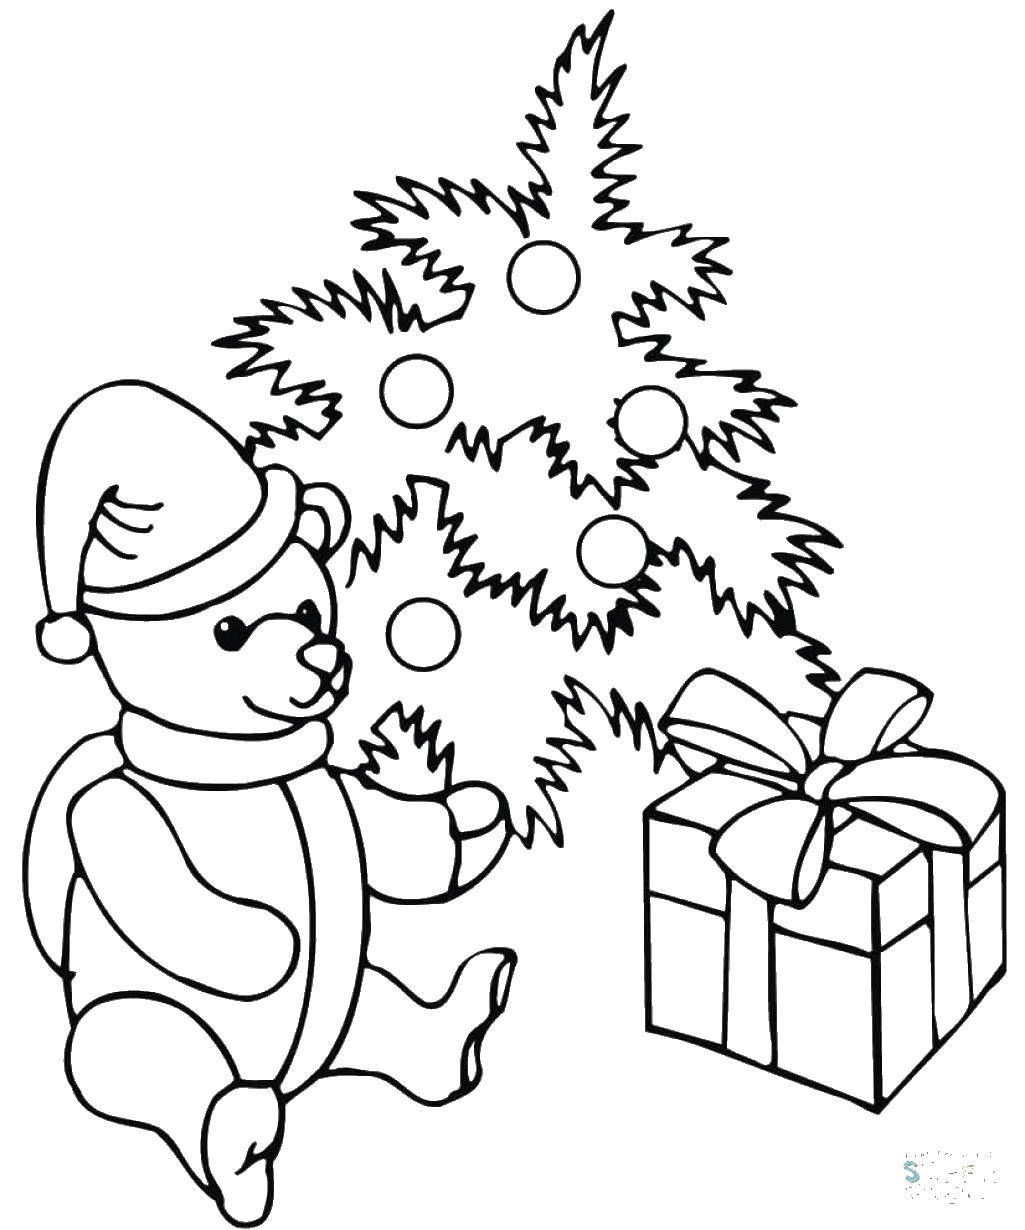 Coloring Gifts under the tree. Category new year. Tags:  New year, tree, gifts, bear.